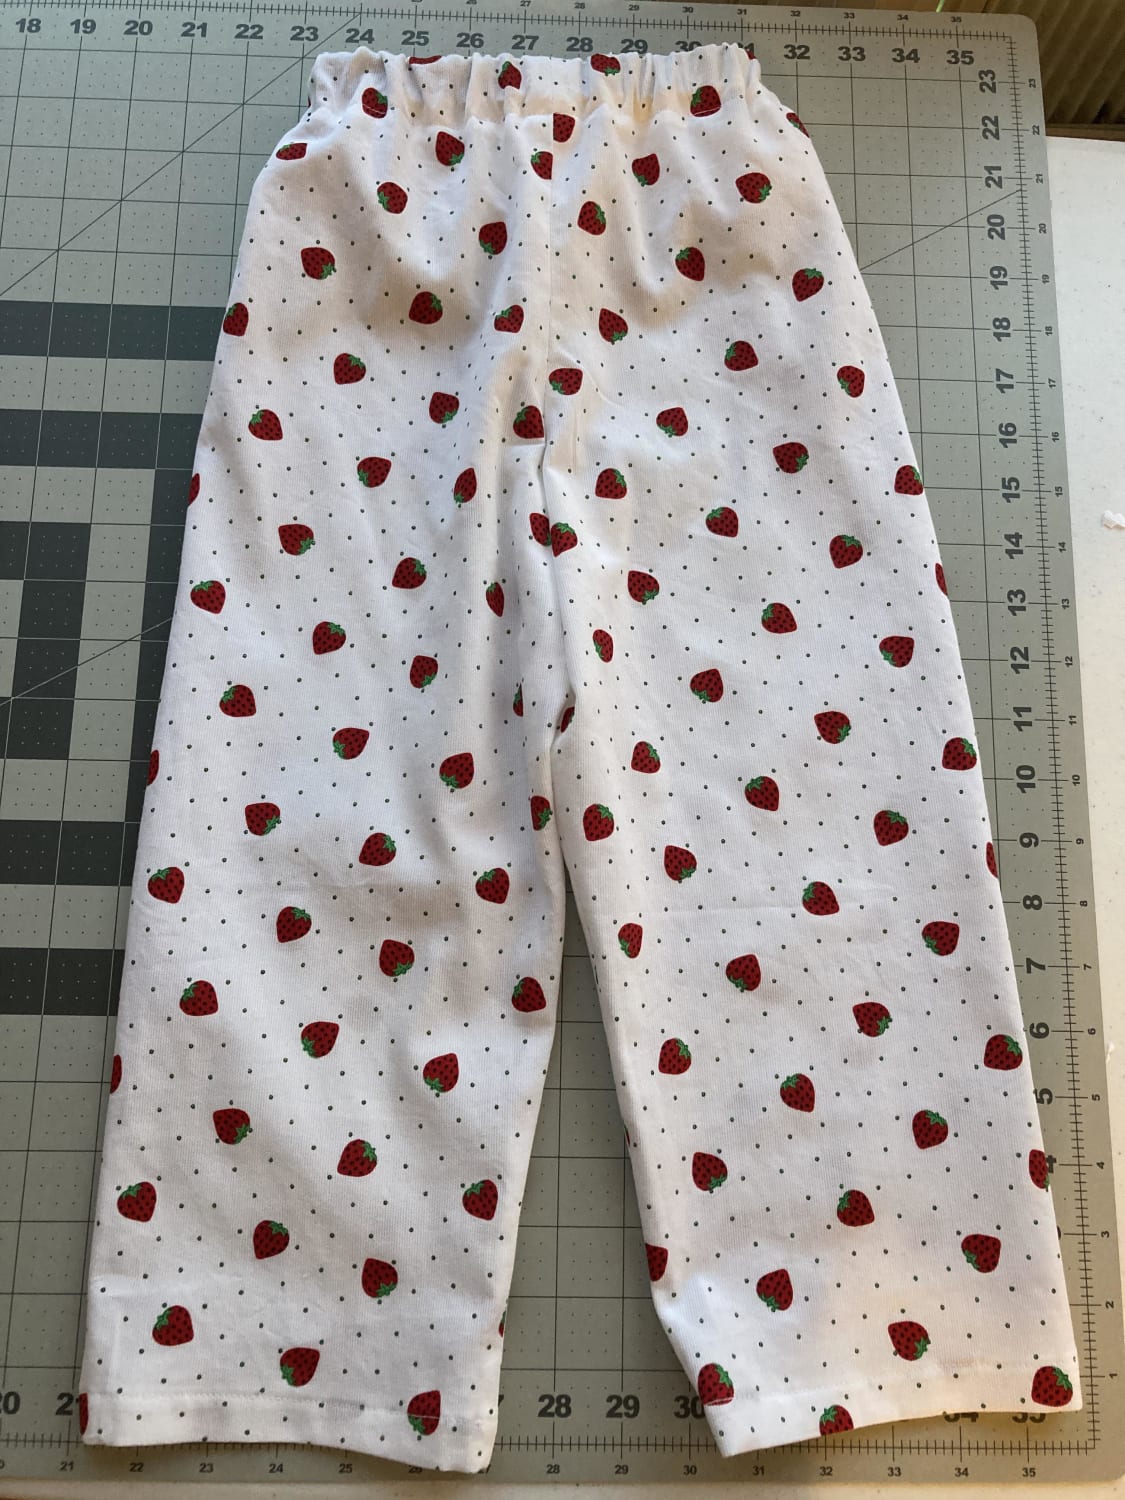 Trying to spice up my sewing life, so I timed how long it took me to make these pajama pants for my daughter. One hour! Not bad for my fifth time making them!